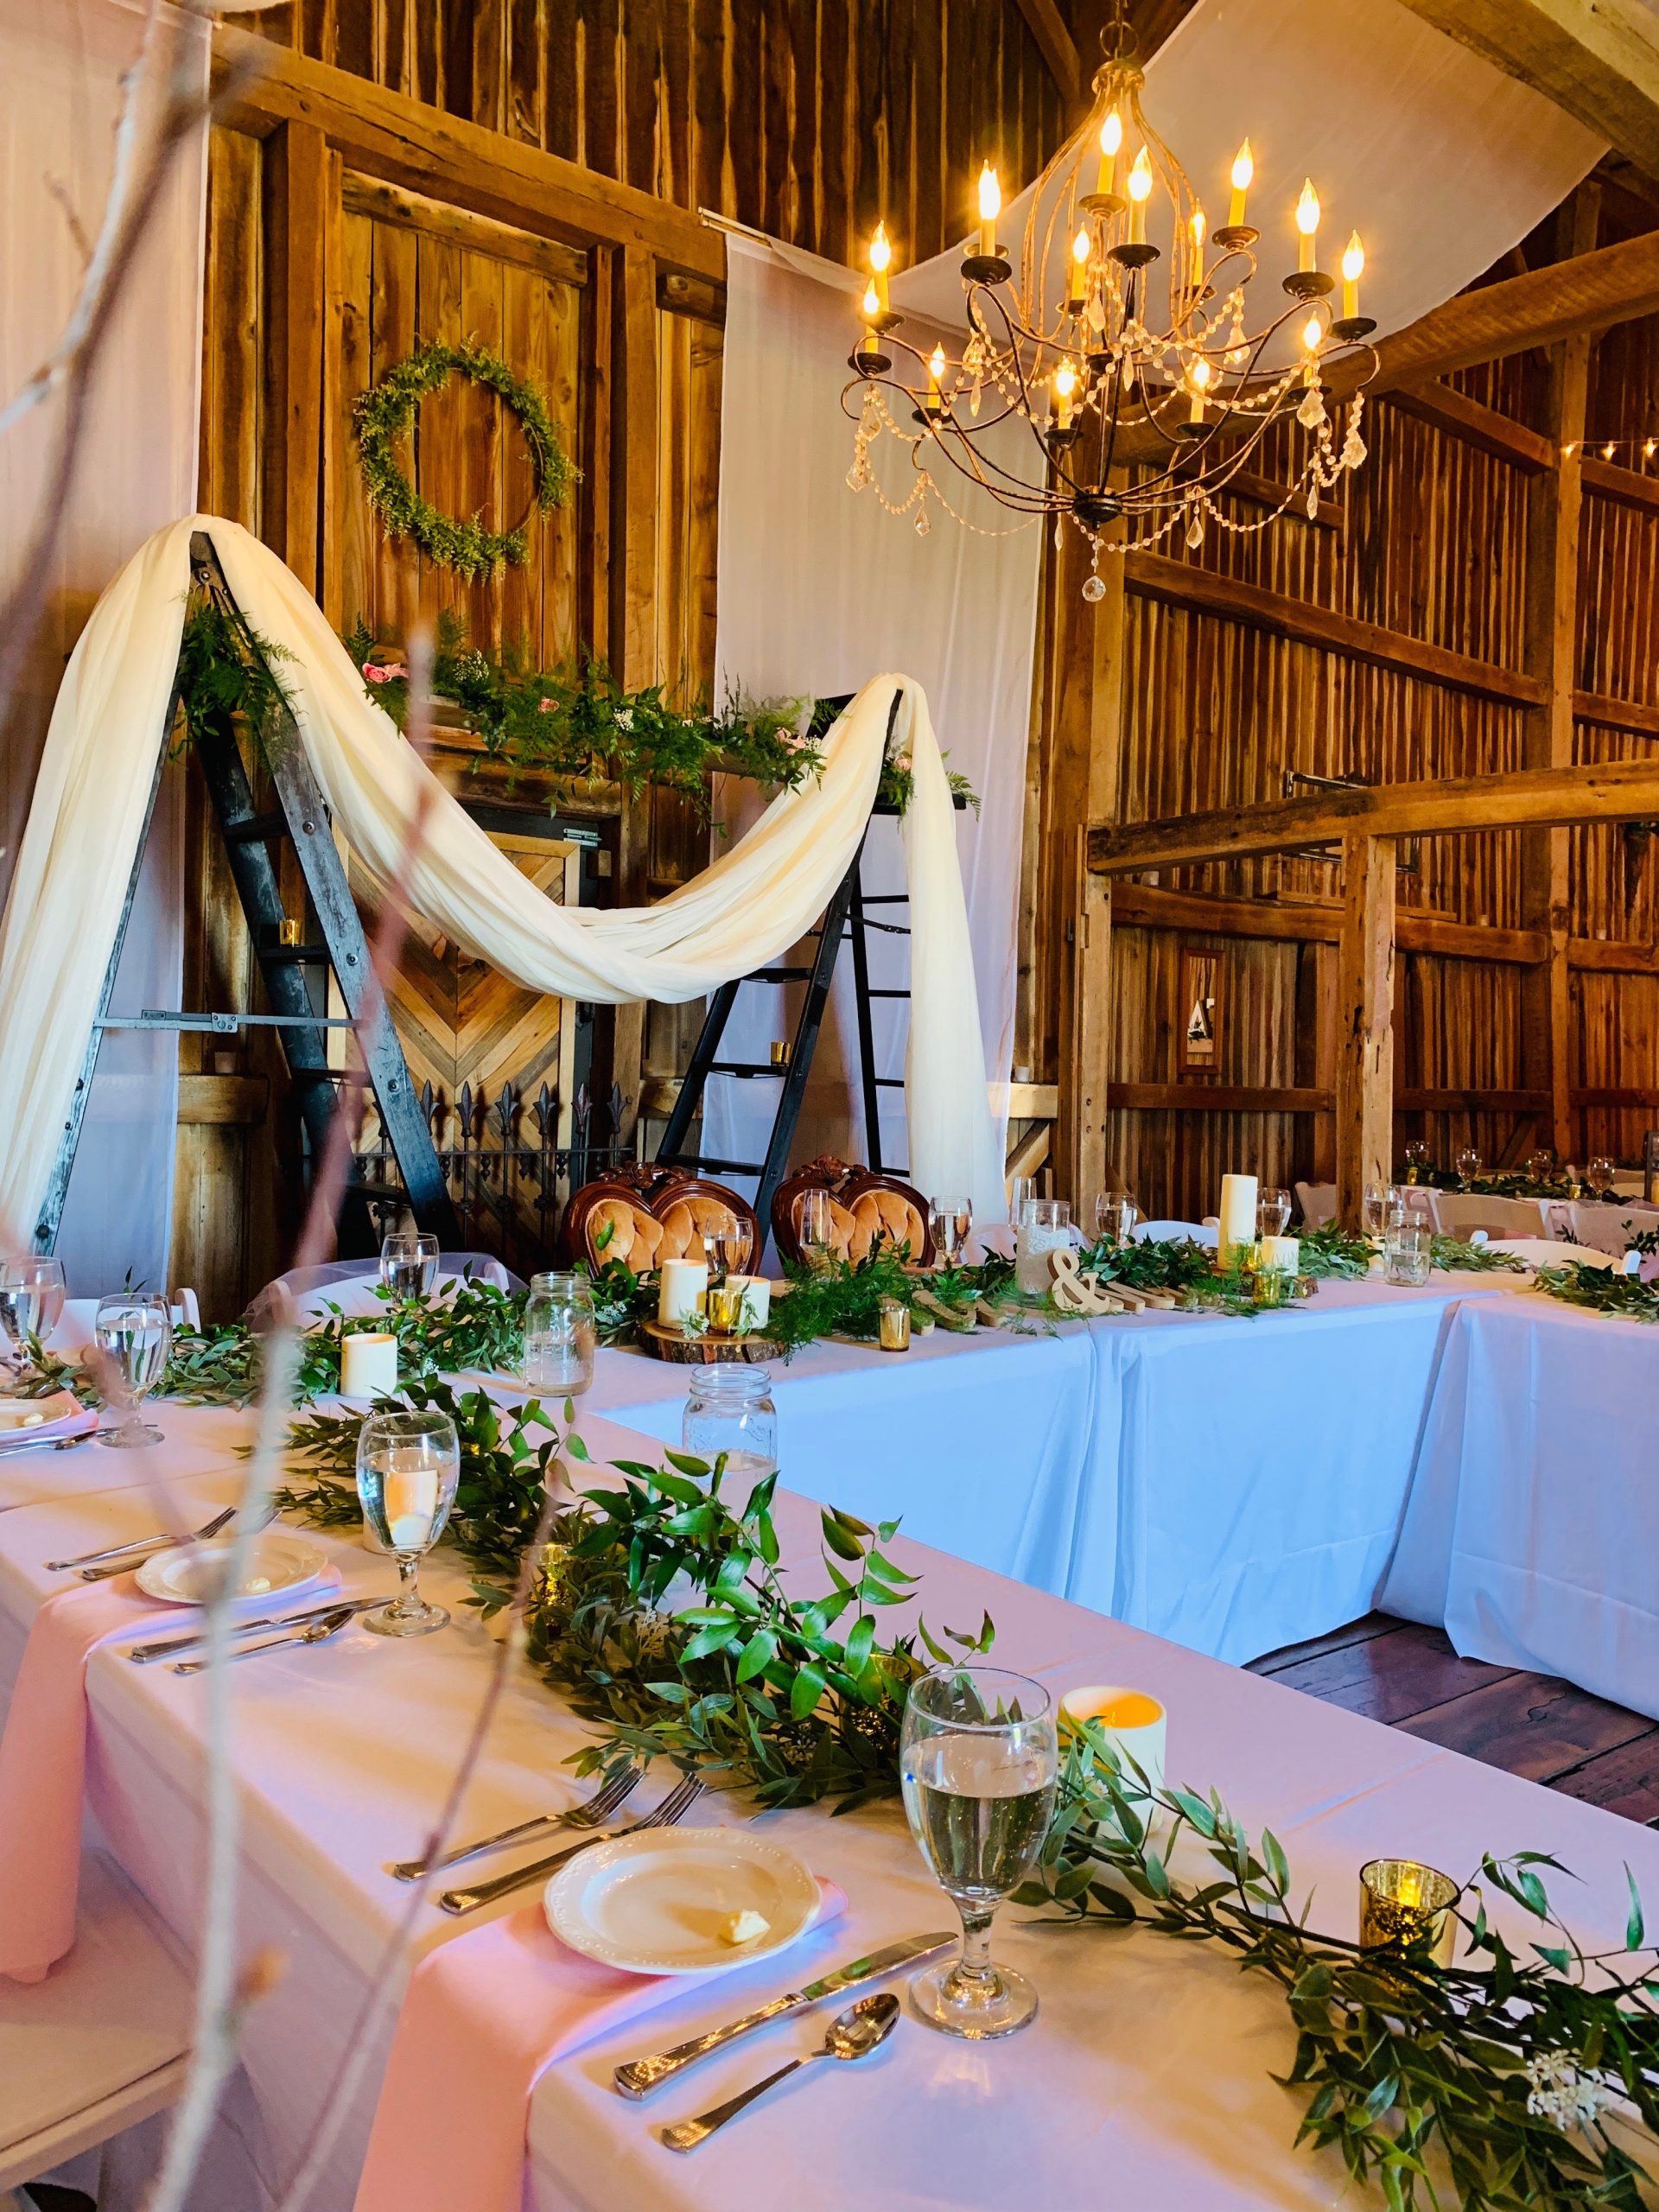 How to organise a boho chic wedding?